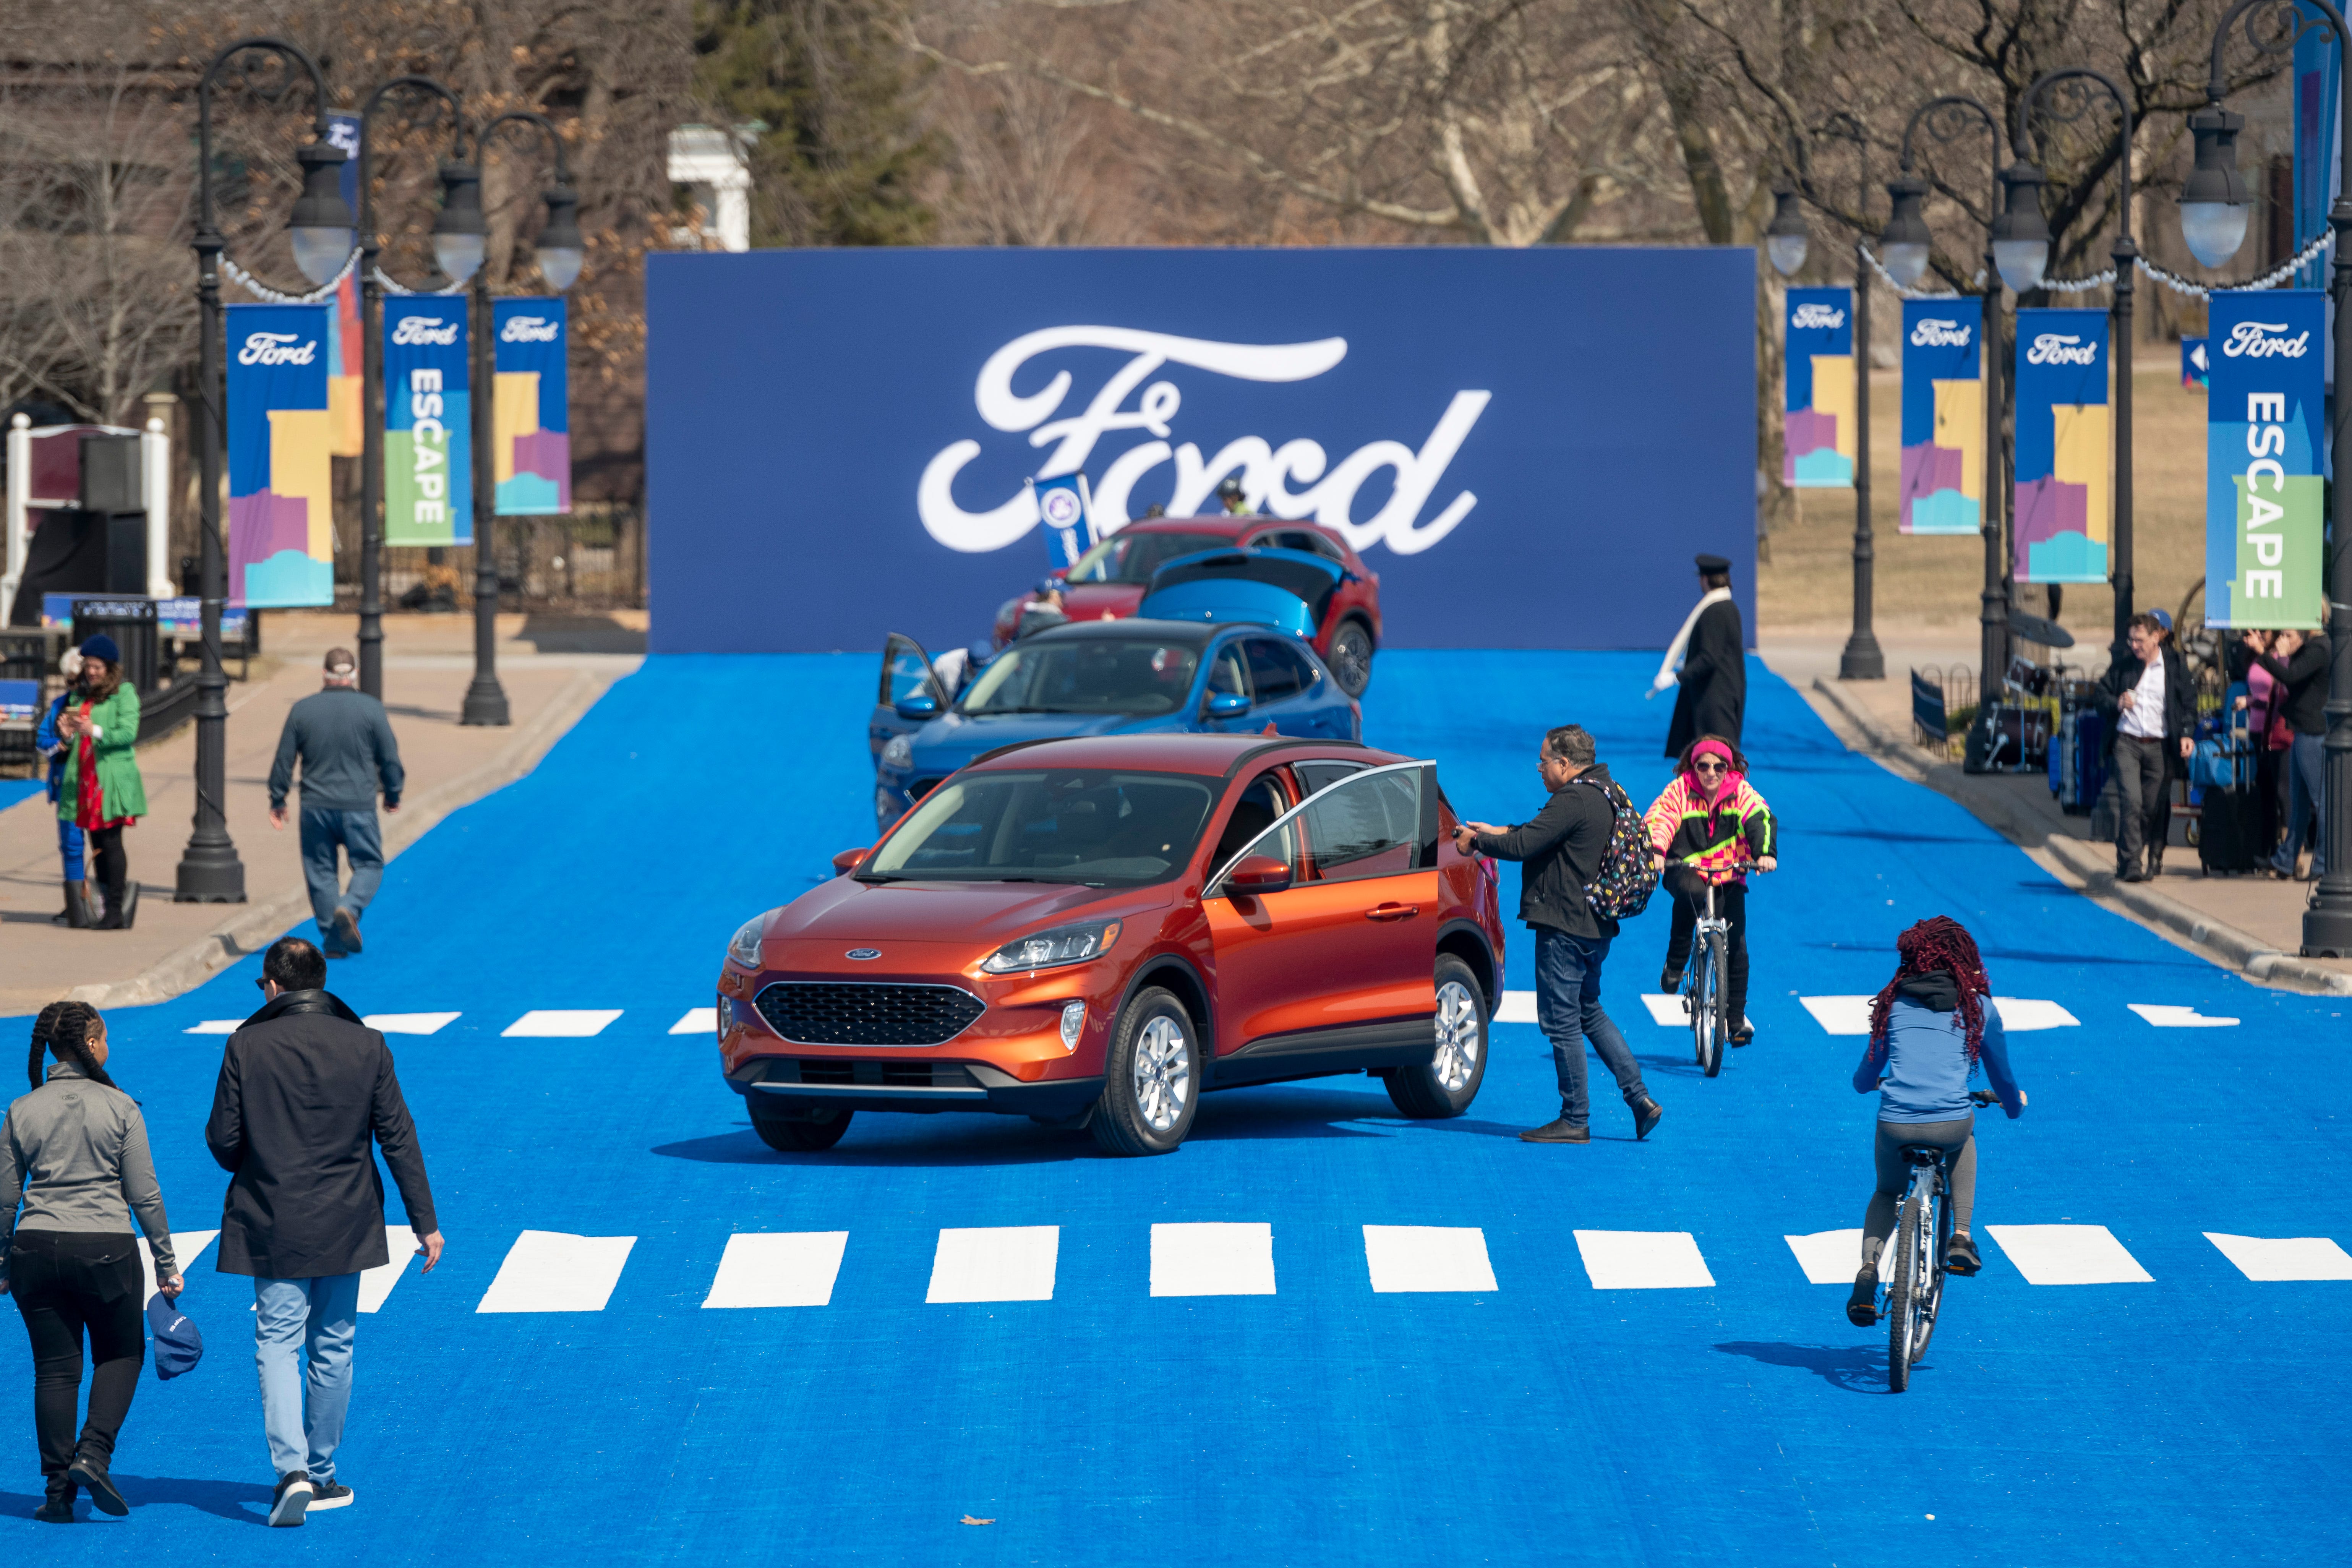 Performers, artists and journalists roam around Greenfield Village during a reveal of the 2020 Ford Escape.